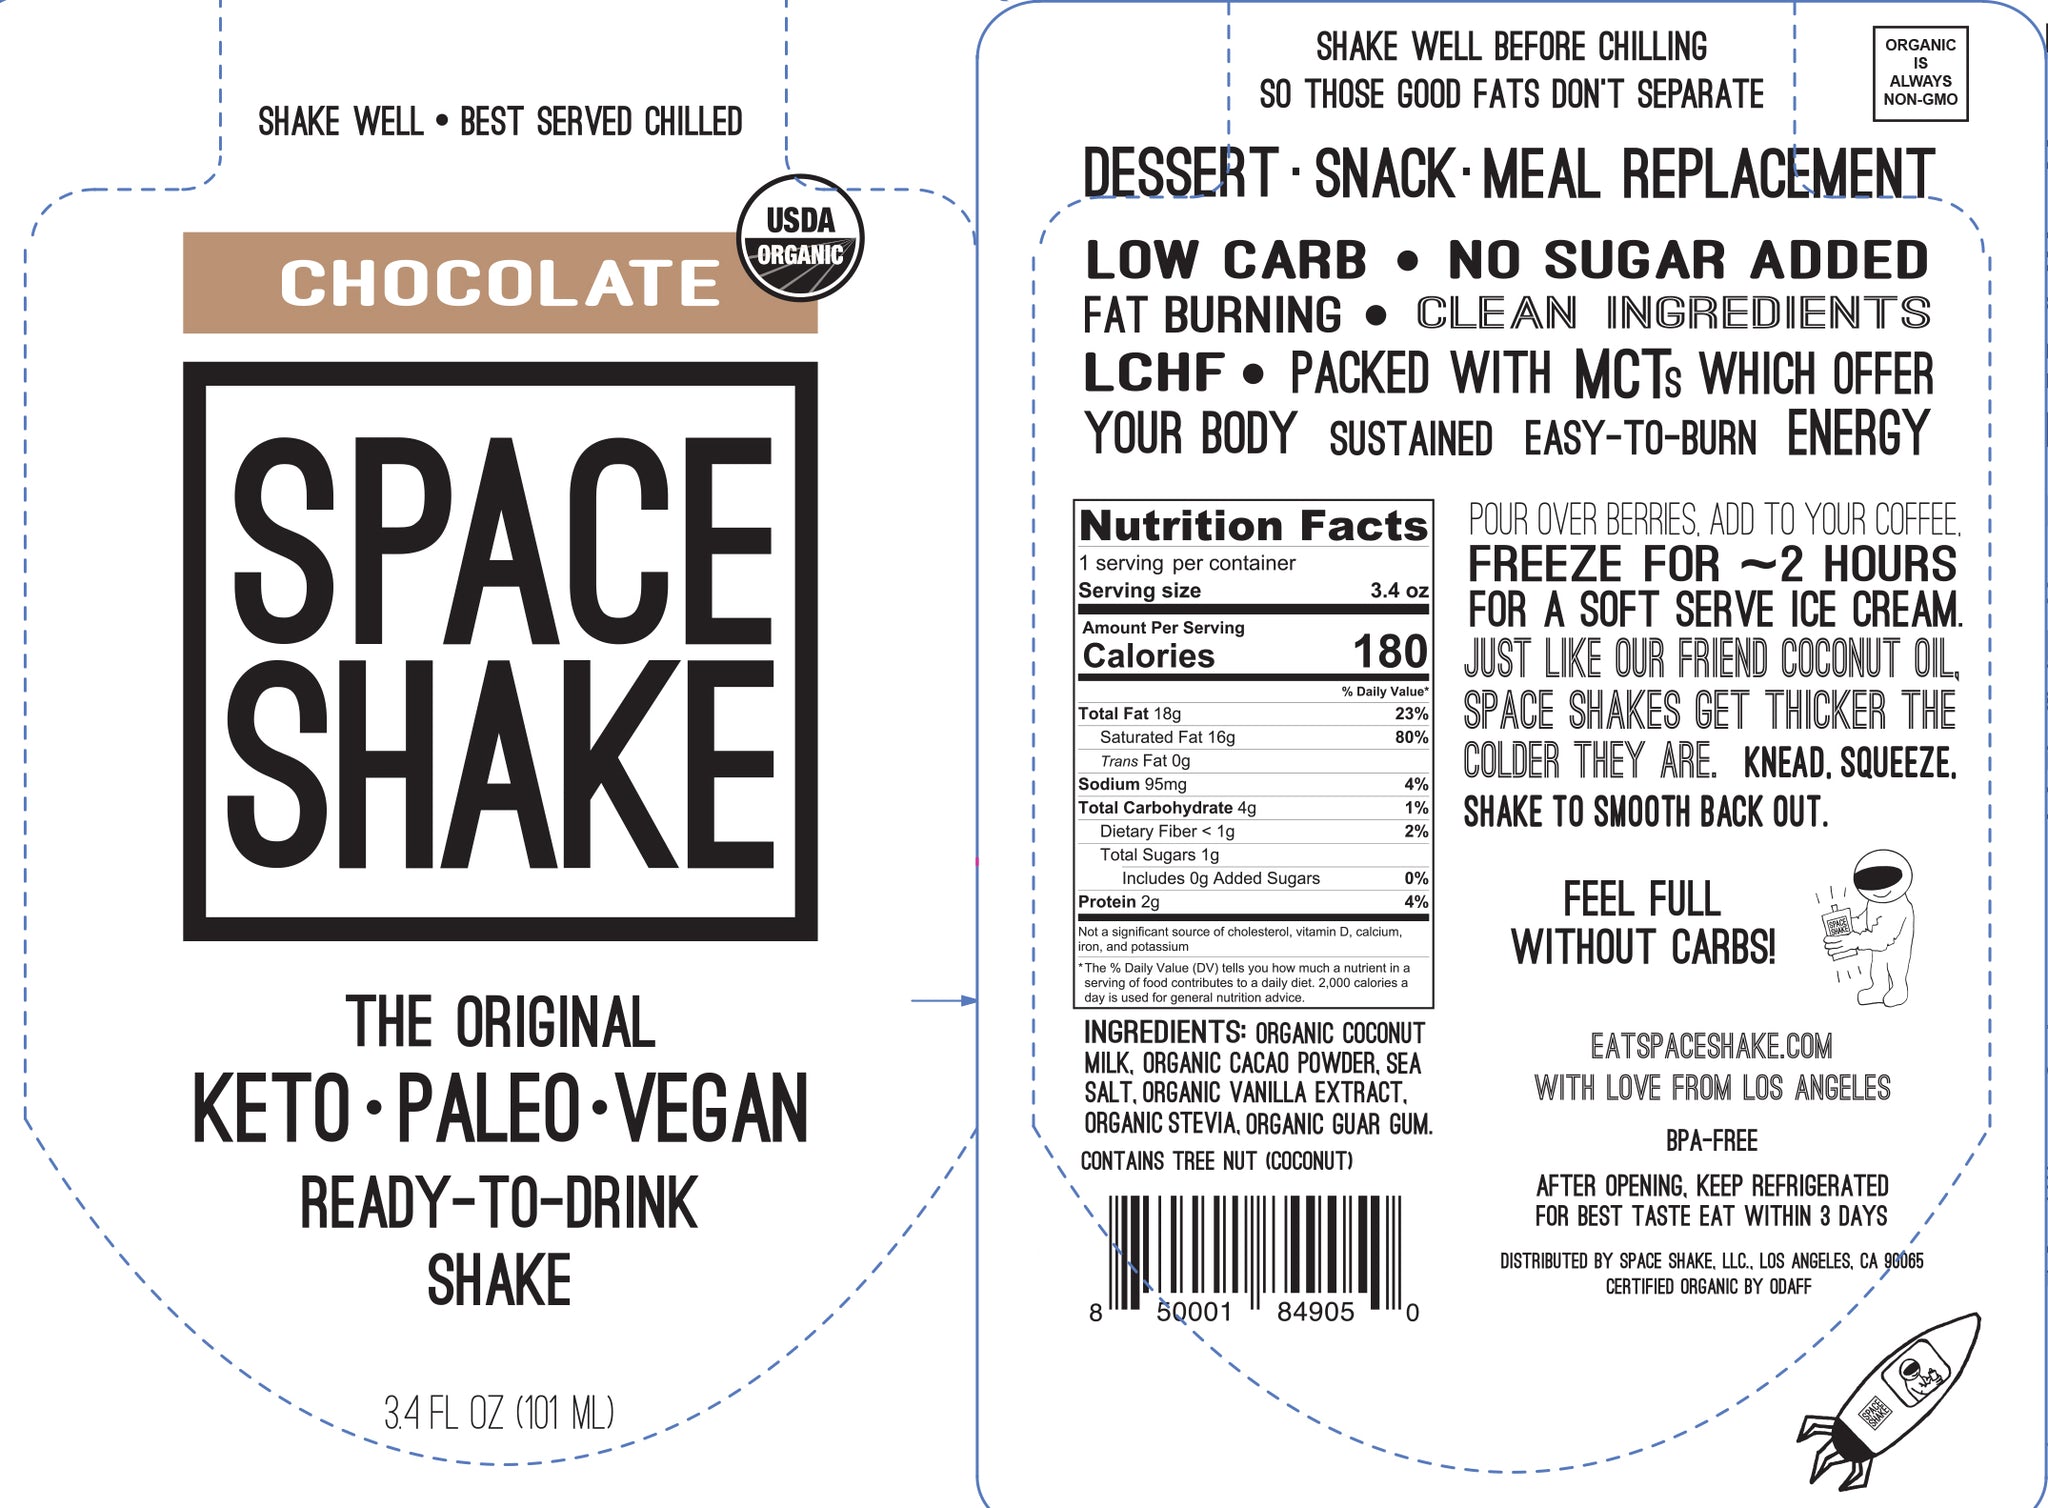 Chocolate SPACE SHAKE Nutrition & Ingredients